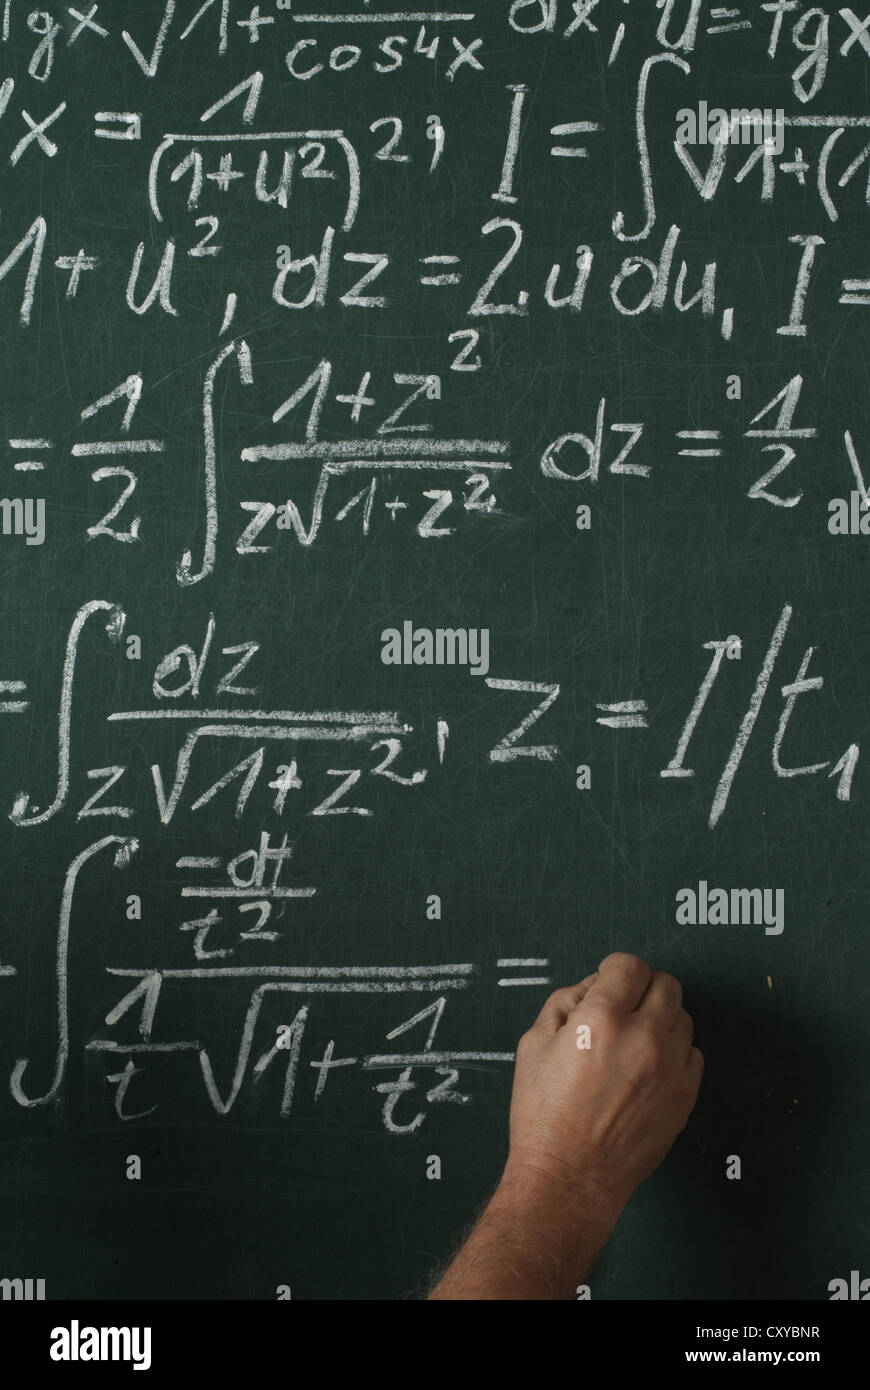 Mathematics lesson, school blackboard with a hand writing, integral calculus Stock Photo